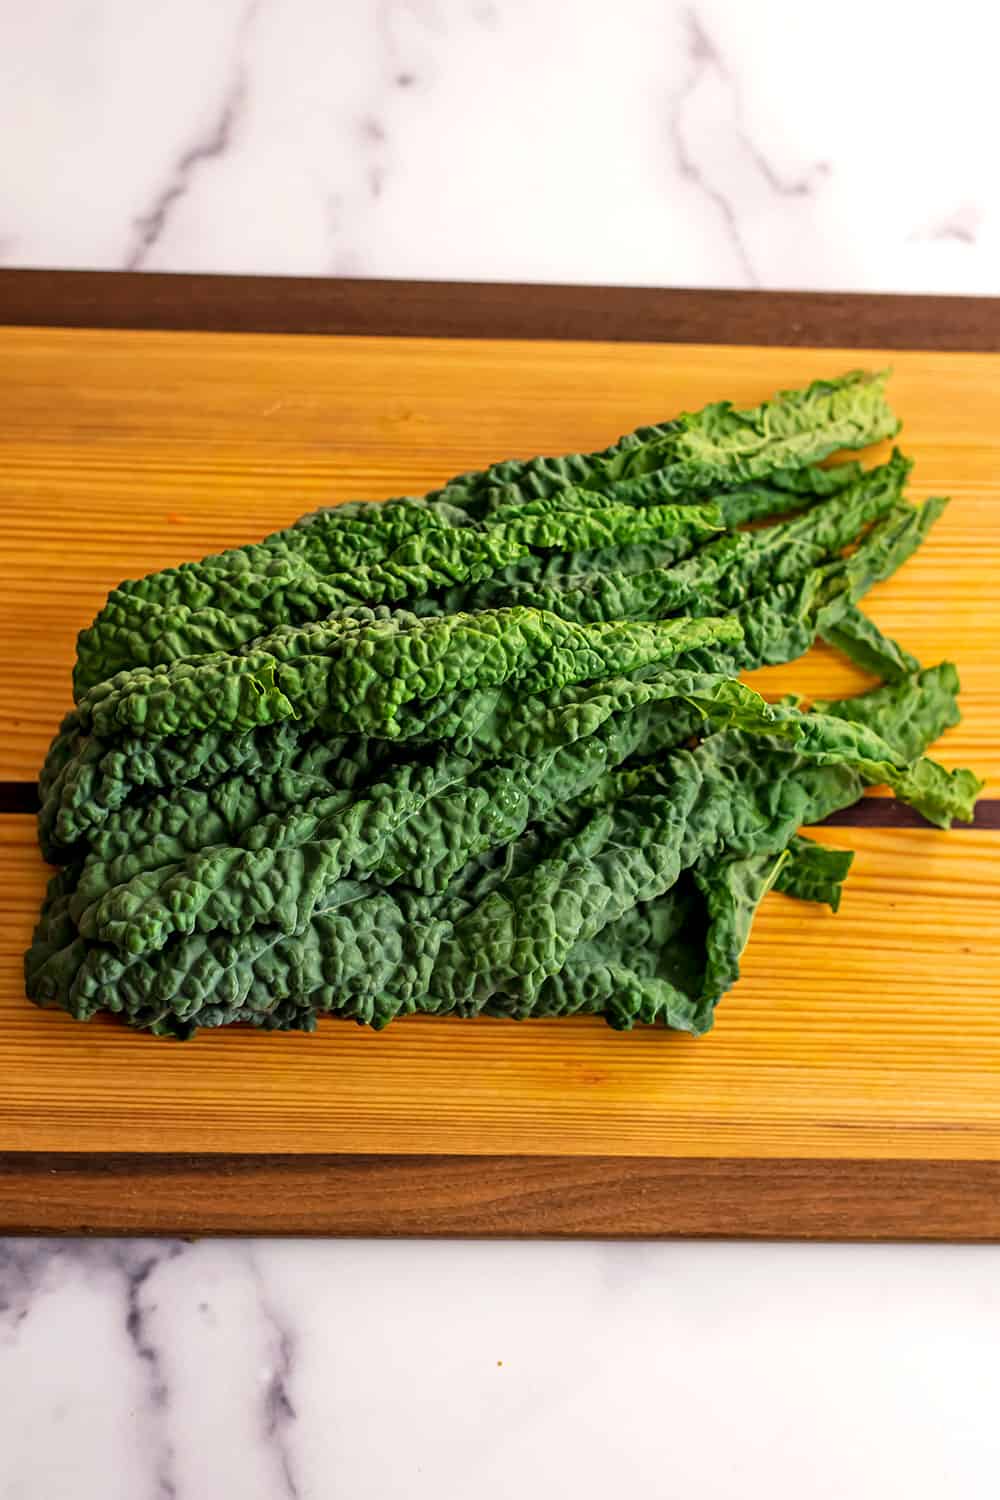 Kale leaves with the stems removed on a wood cutting board.